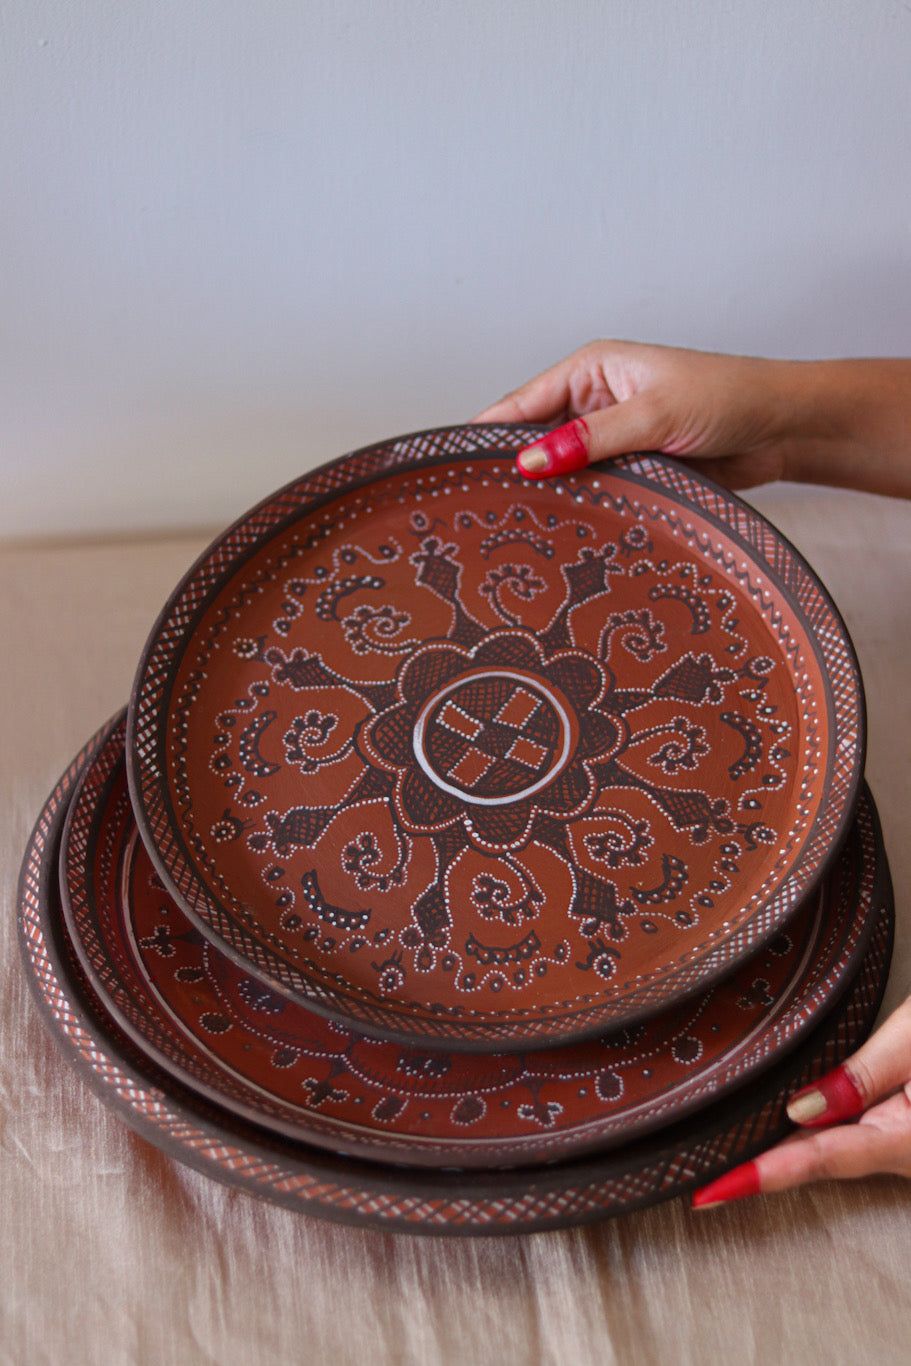 Hand-Painted Indian Dinner Set